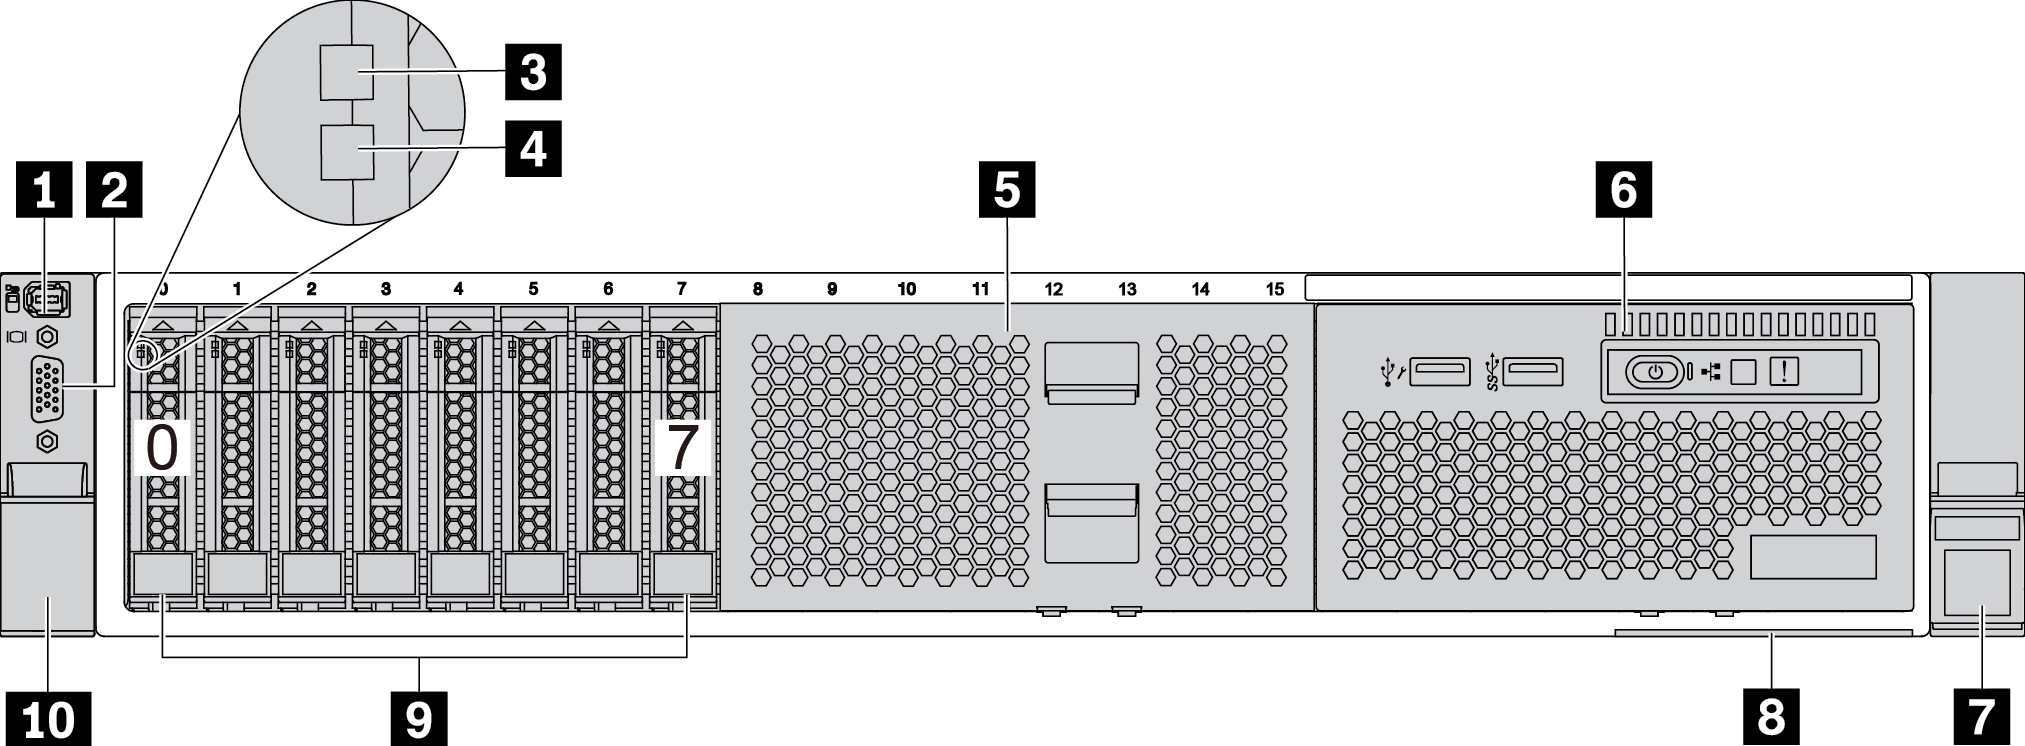 Front view of server models with eight 2.5-inch front drive bays